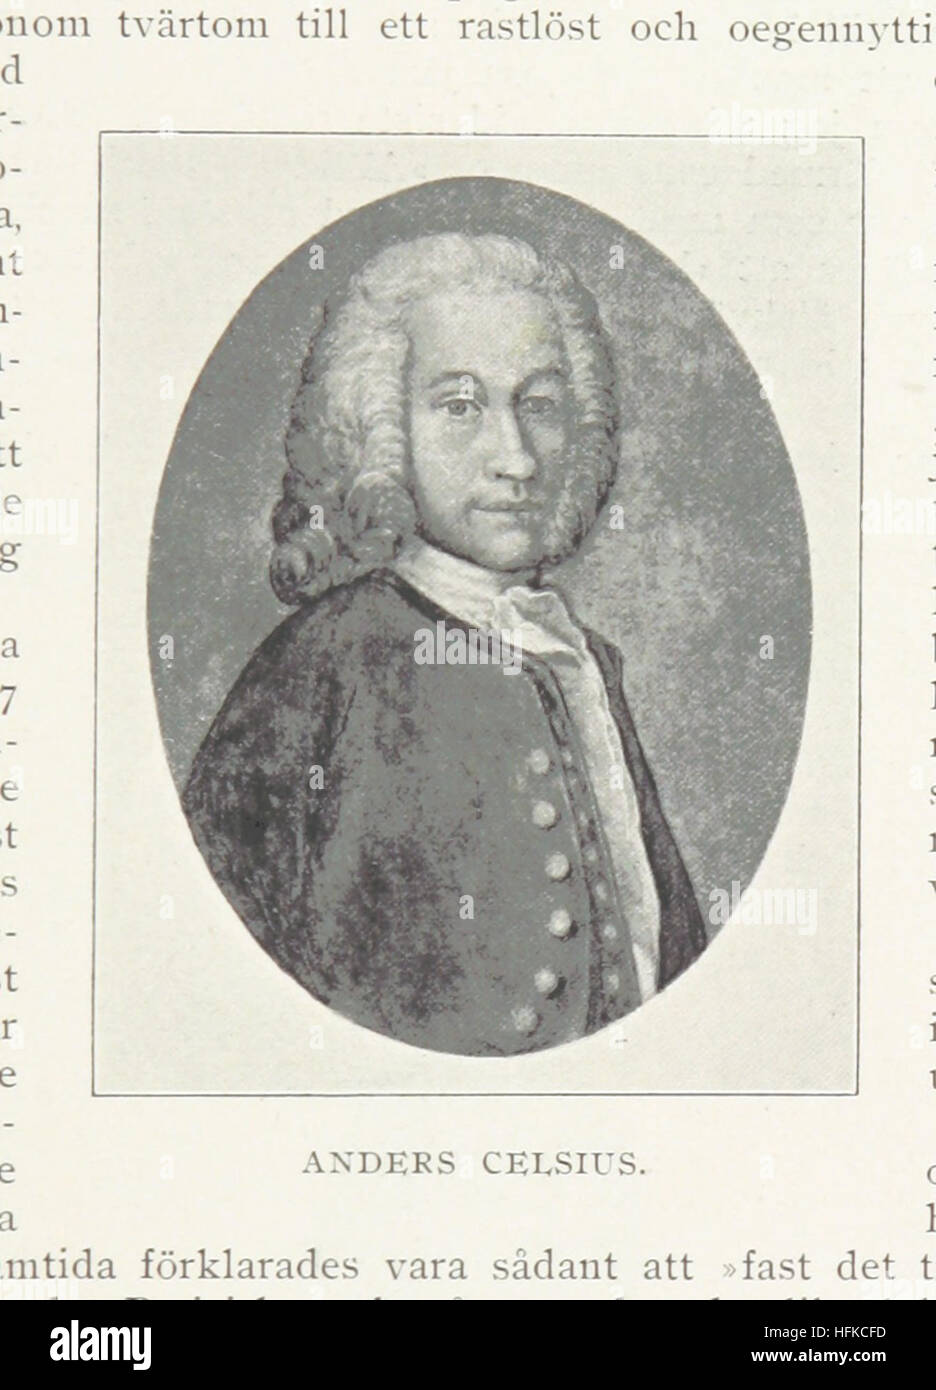 Image taken from page 101 of 'Från Upländsk bygd. [Edited by Count E. Lewenhaupt.]' Image taken from page 101 of 'Från Upländsk bygd [Edited Stock Photo